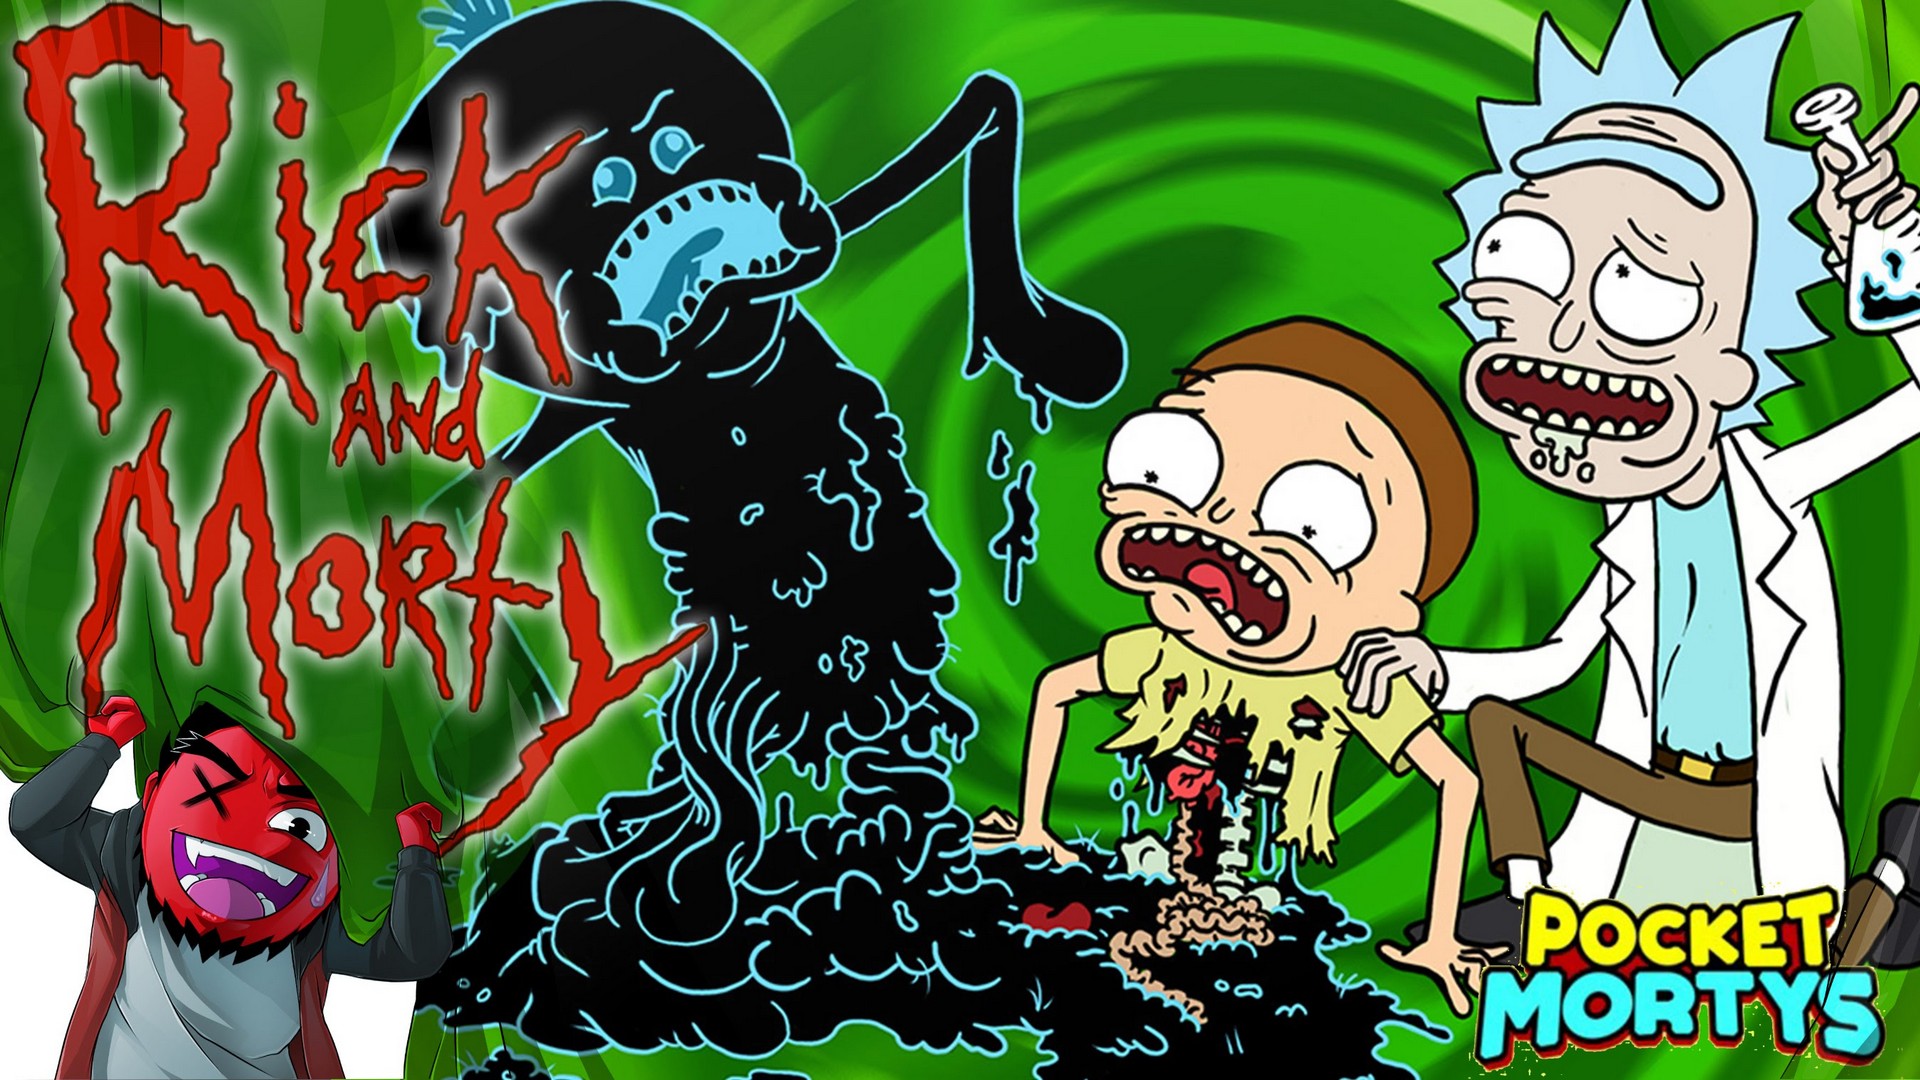 Rick and Morty Wallpaper For Desktop with image resolution 1920x1080 pixel. You can use this wallpaper as background for your desktop Computer Screensavers, Android or iPhone smartphones